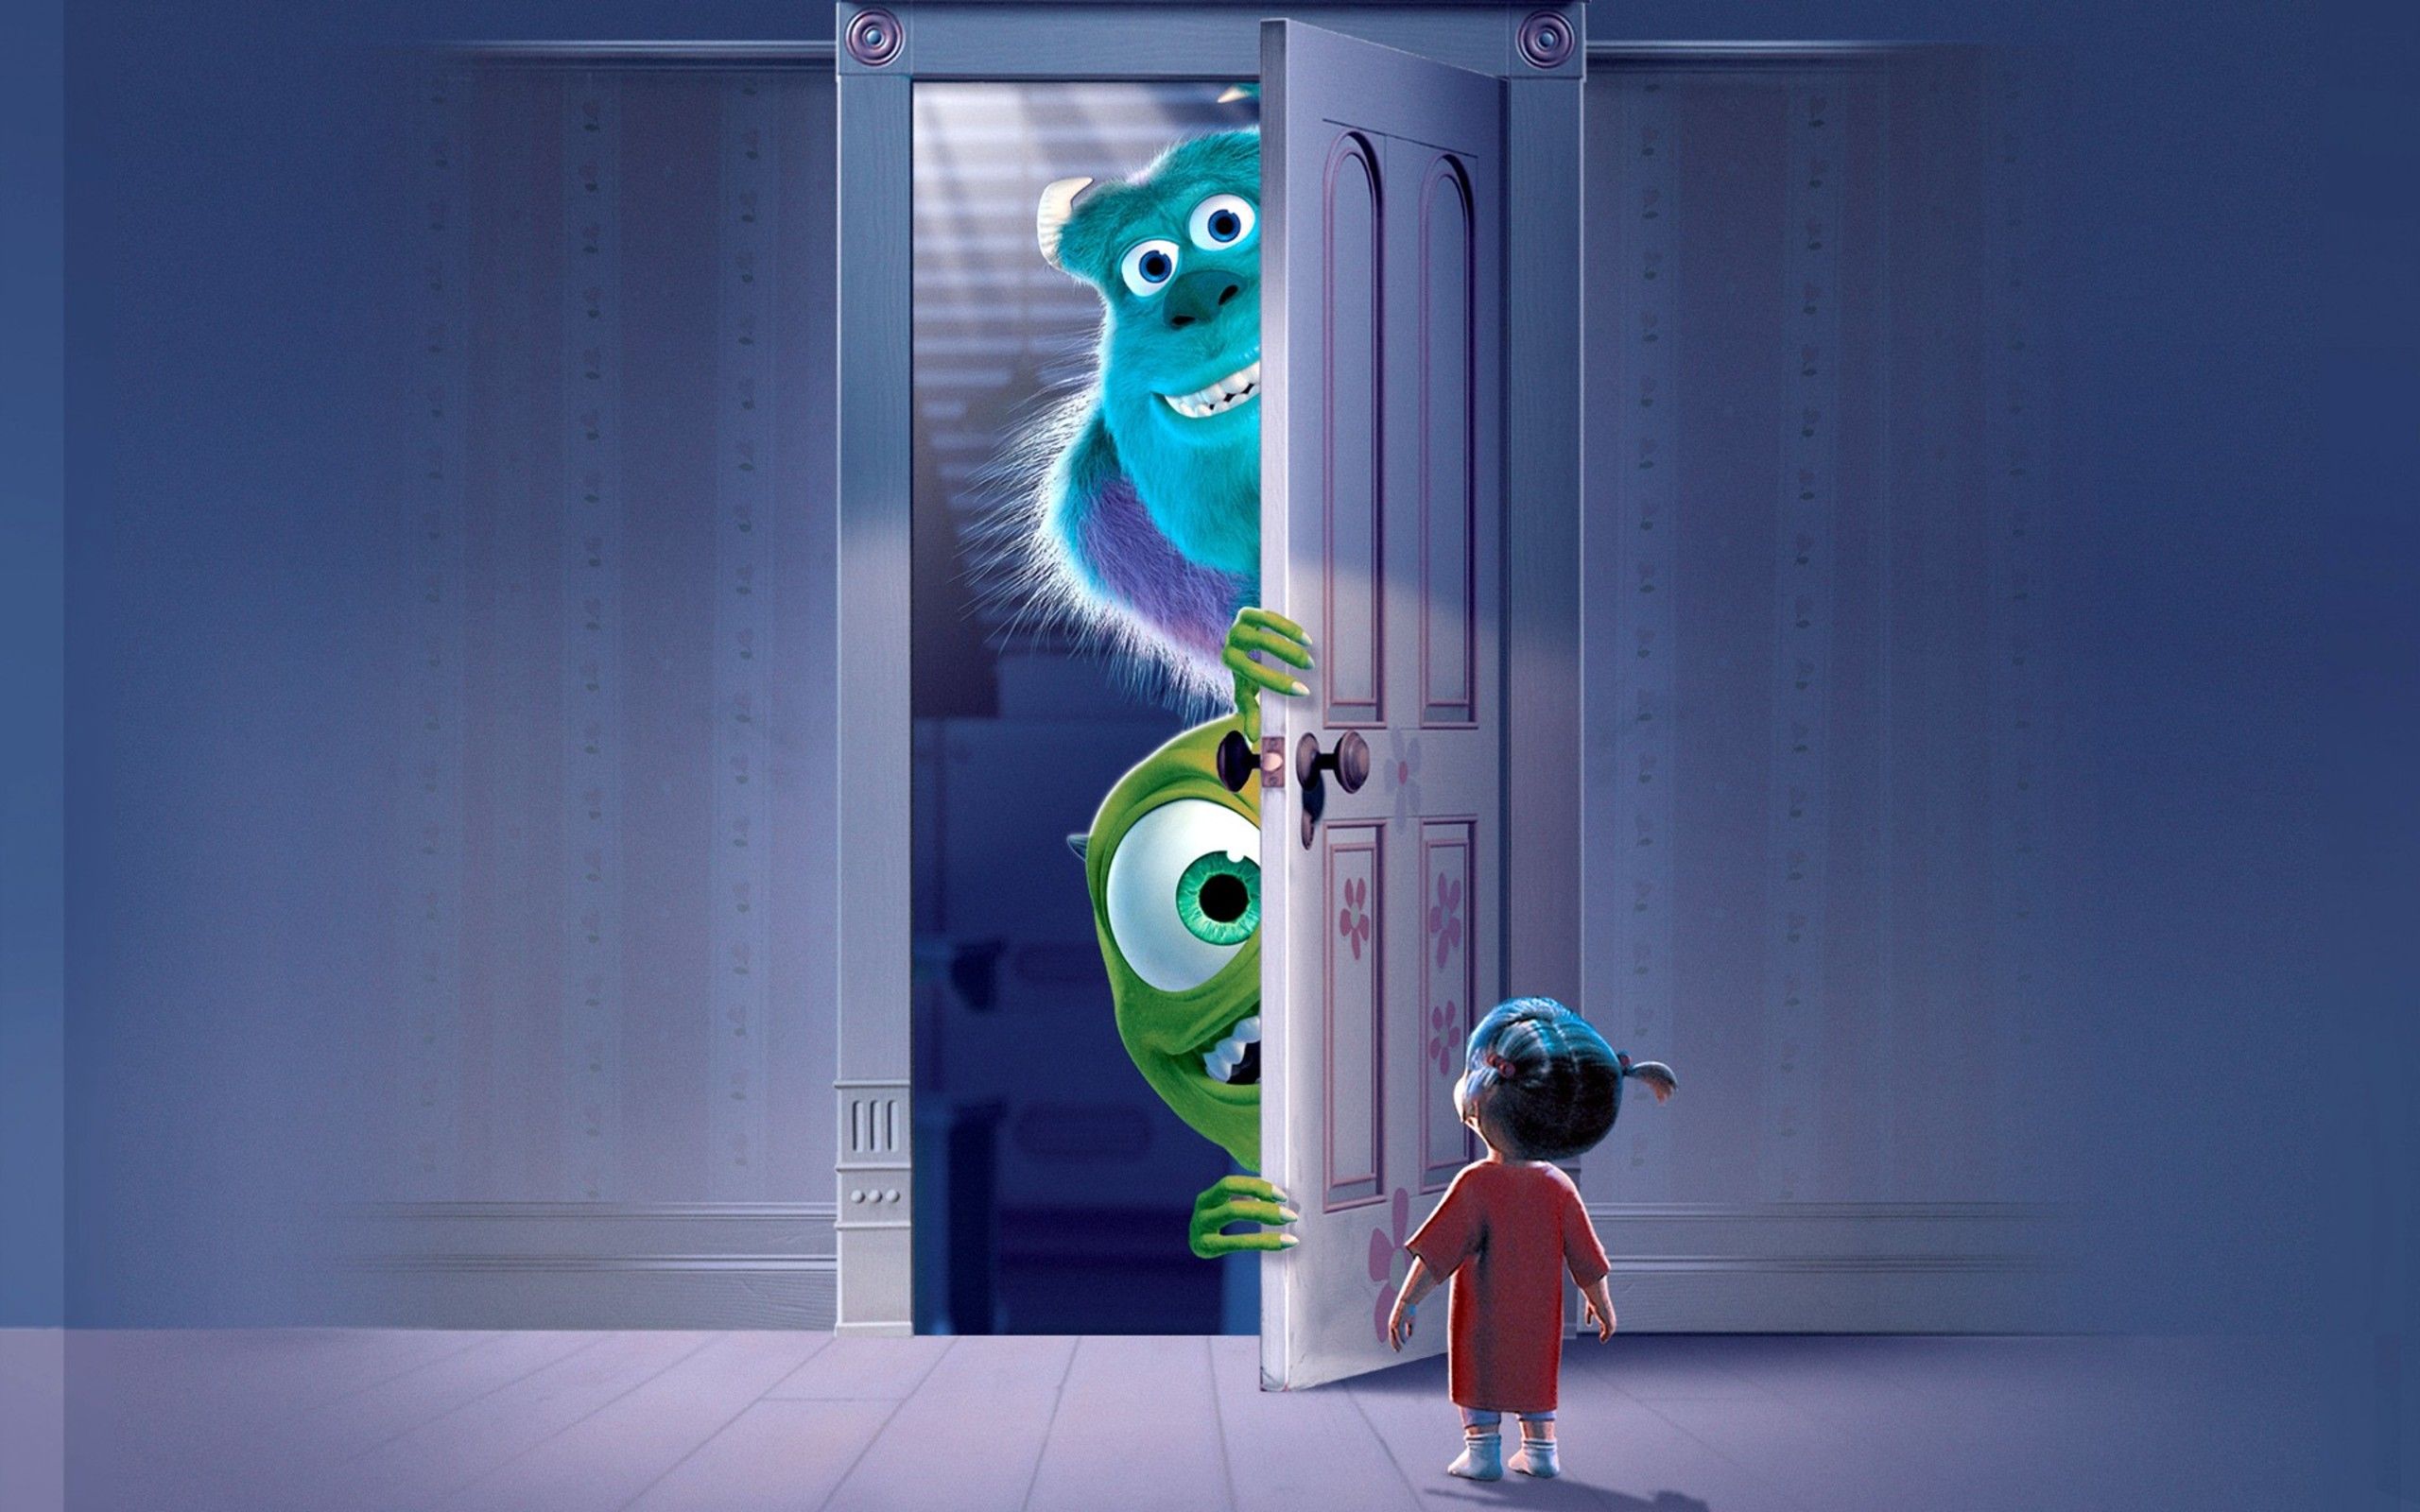 Monsters Inc Wallpapers